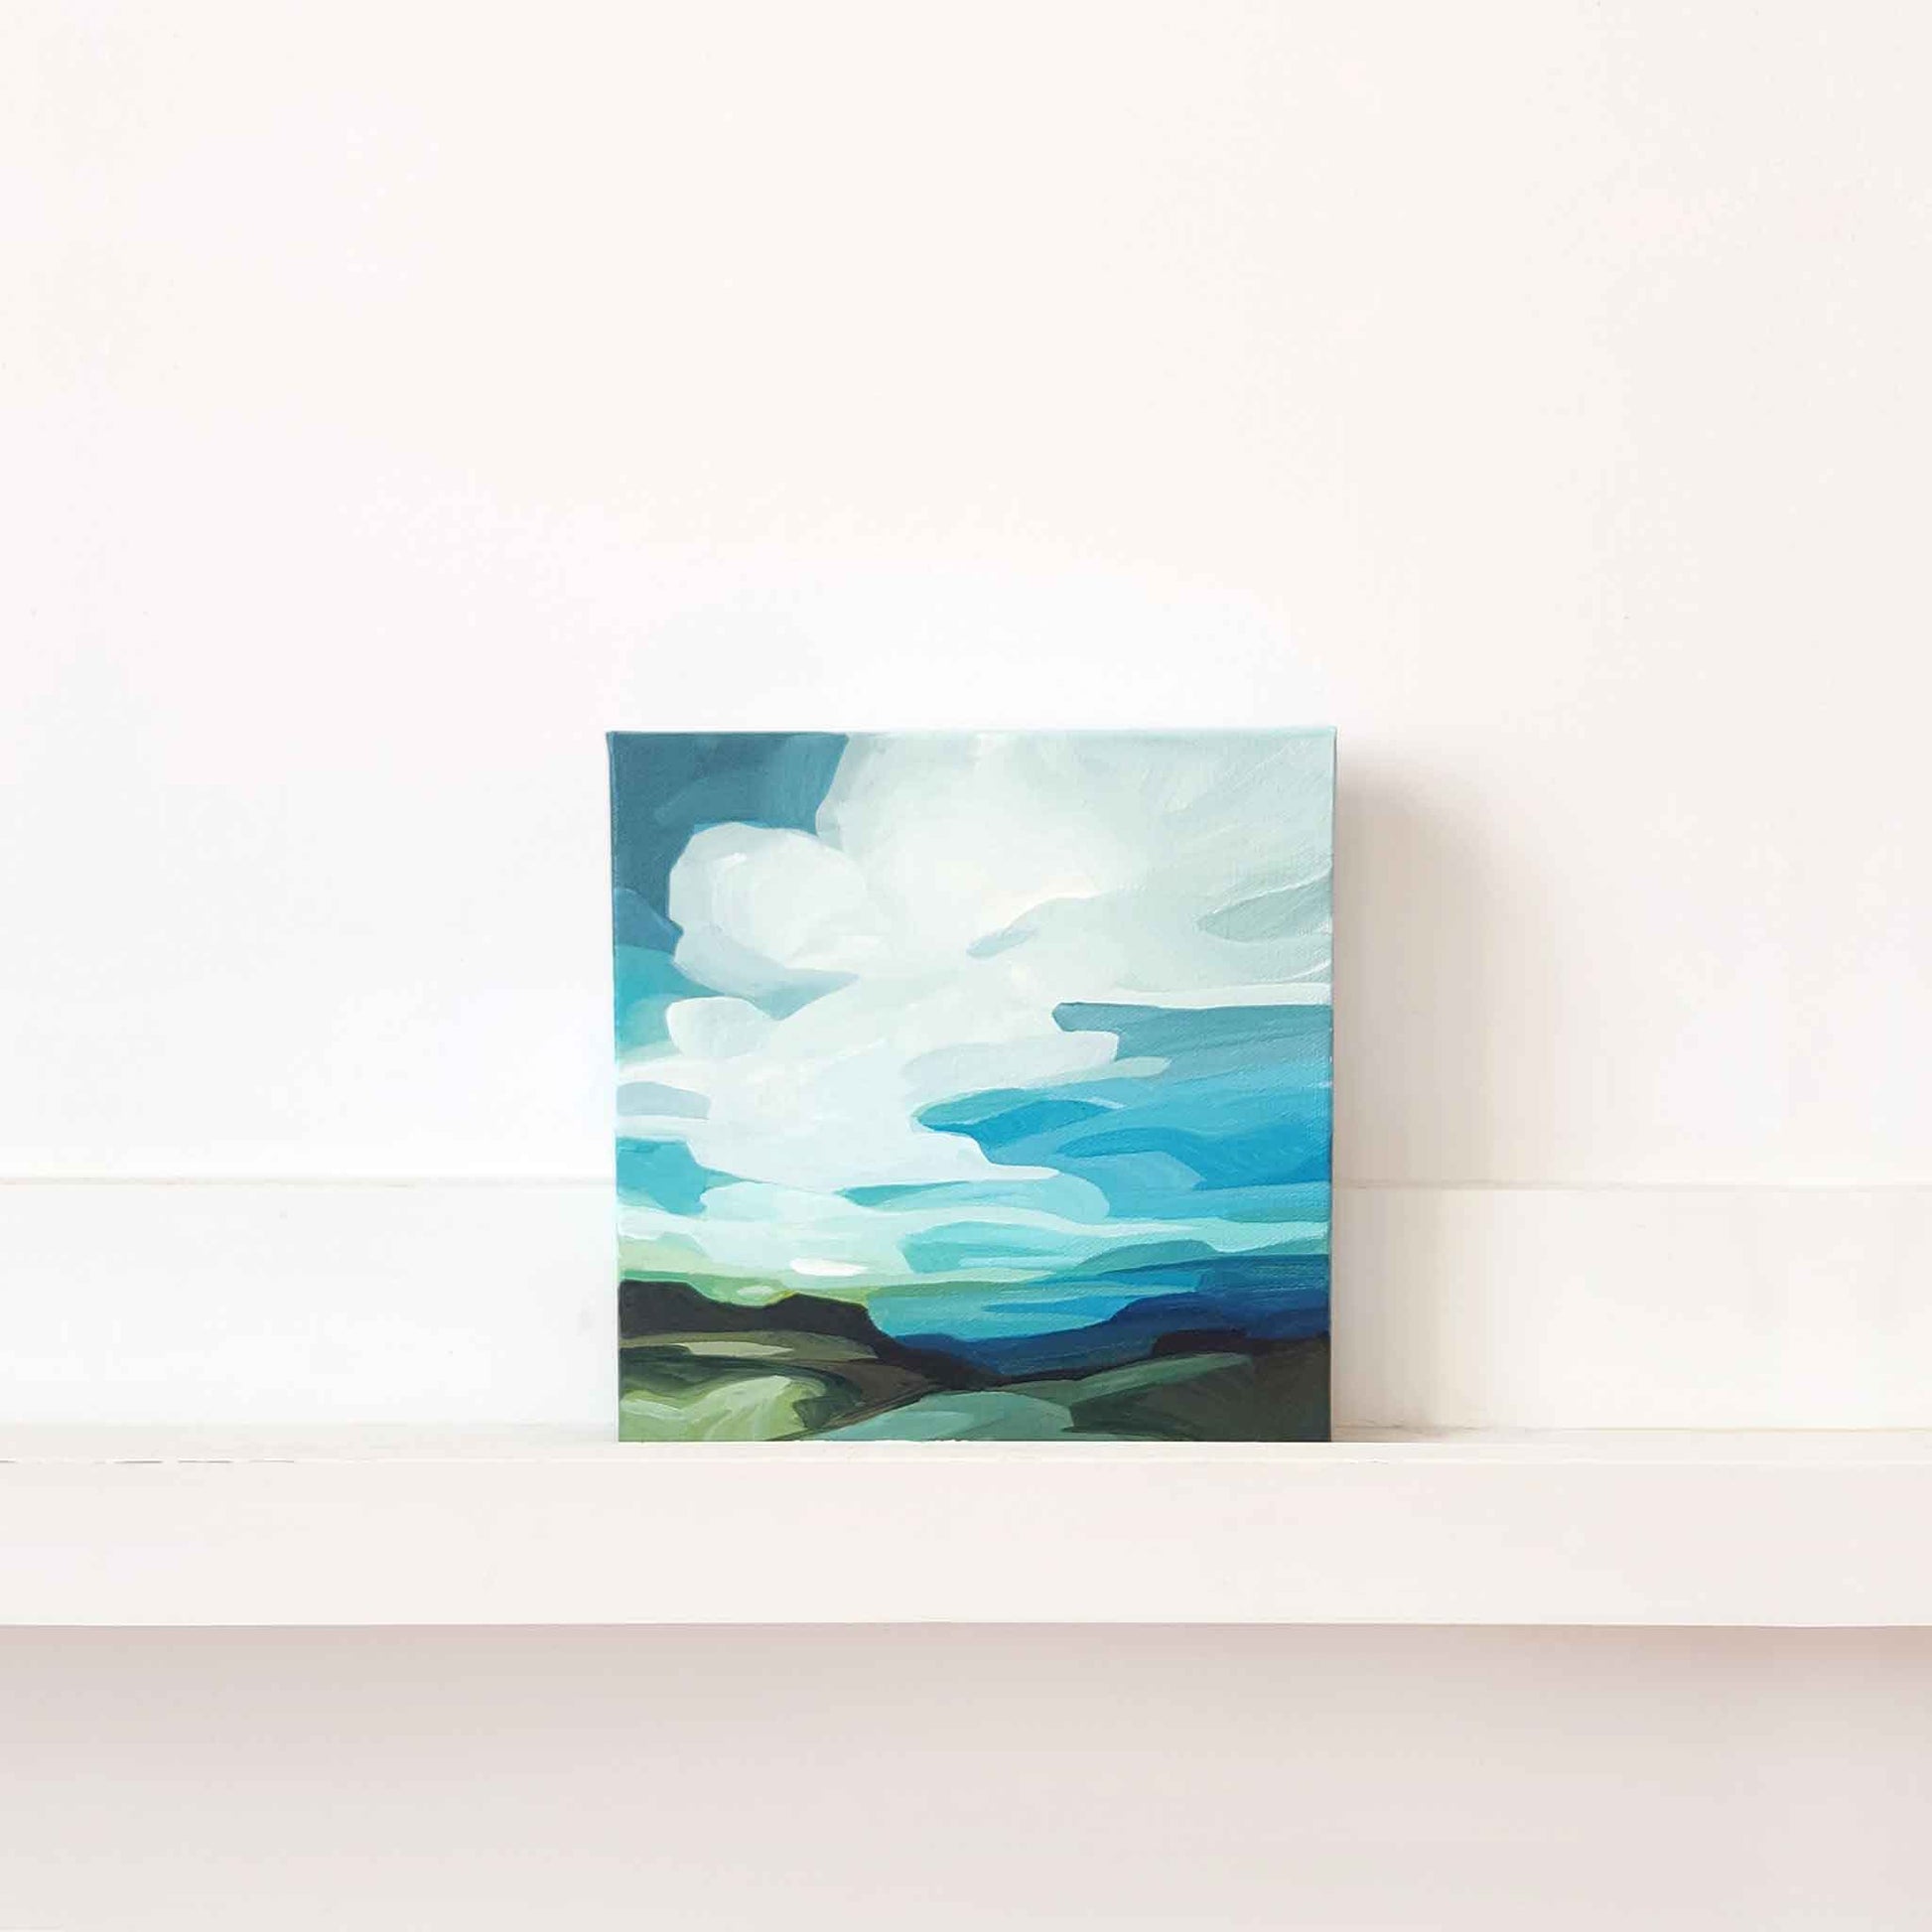 abstract landscape painting with white clouds floating in a blue sky